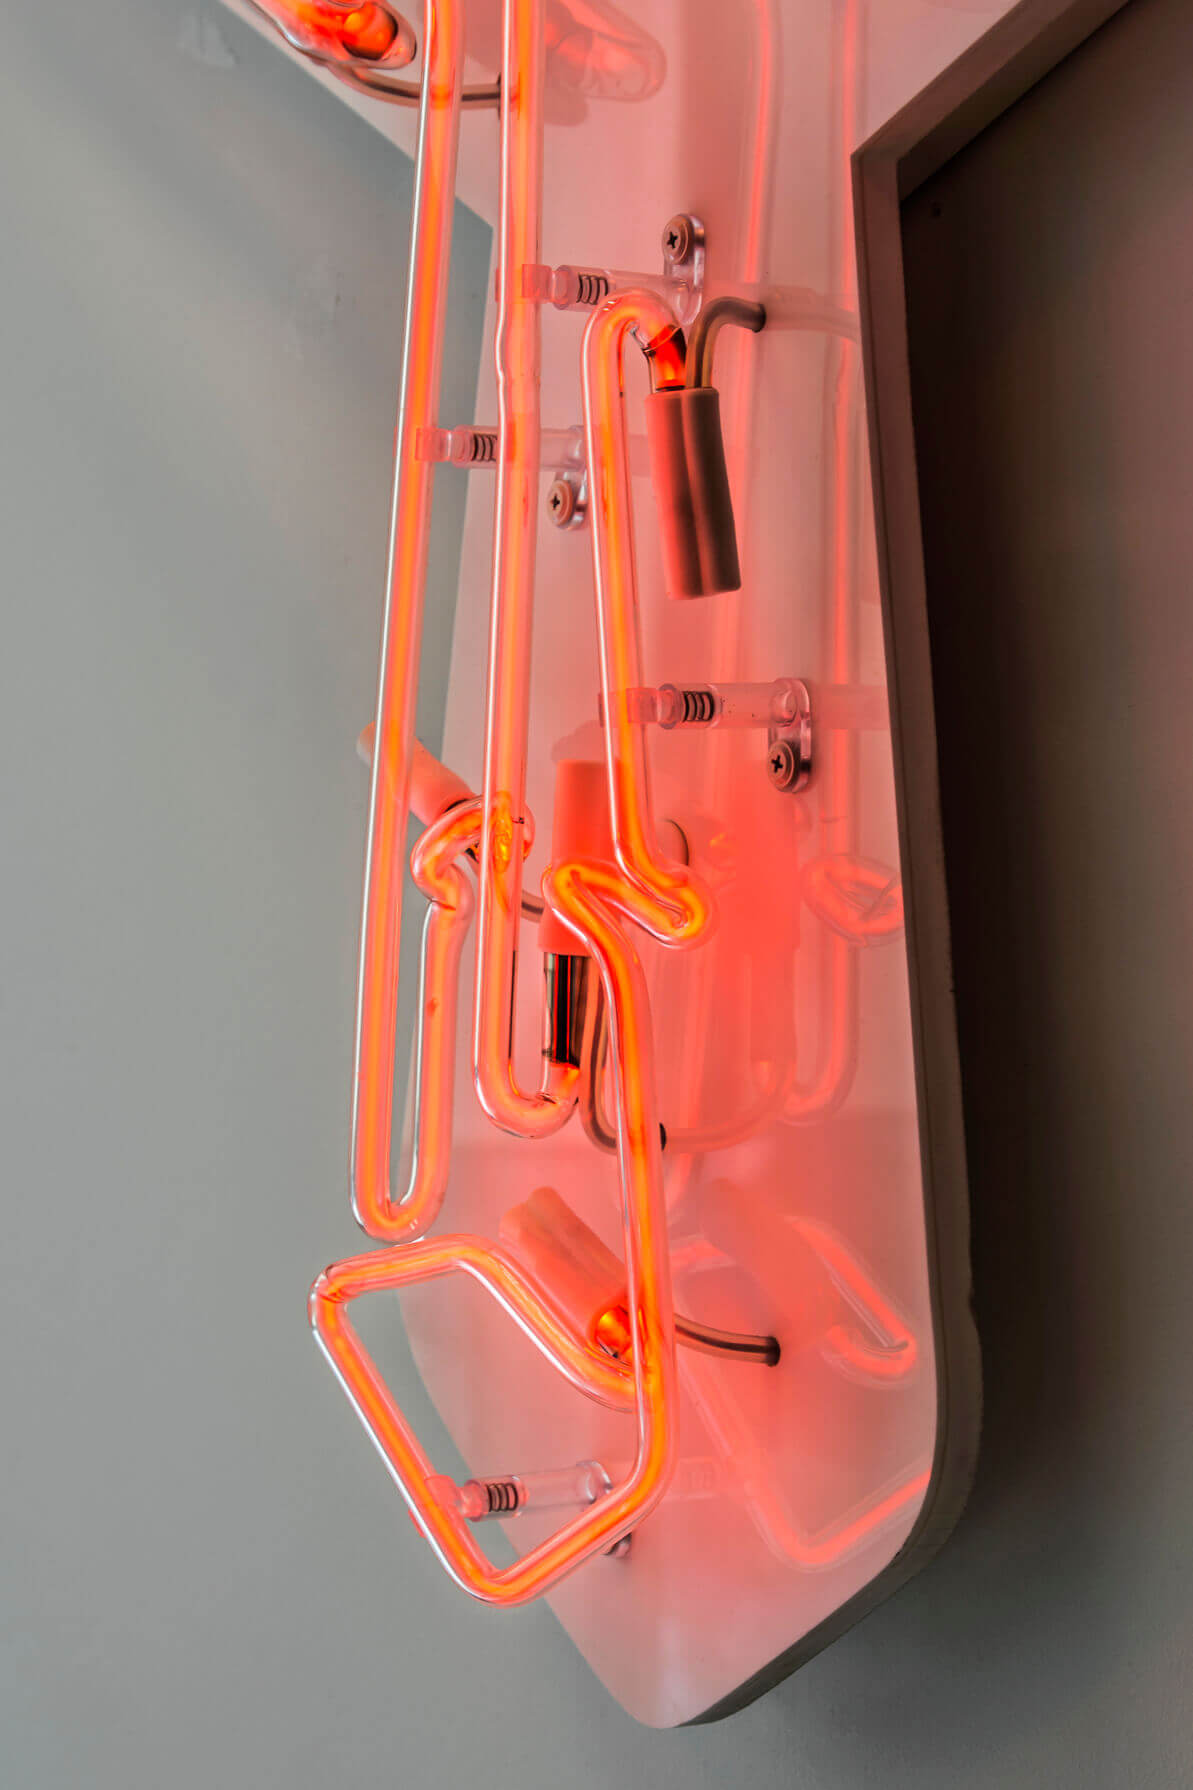 RICOH - neon-ricoh-red-neon-in-office-neon-on-the-wall-interior-neon-on-white-plexi-neon-logo-sign-logo-neon-neon-on-order-gdansk-obc